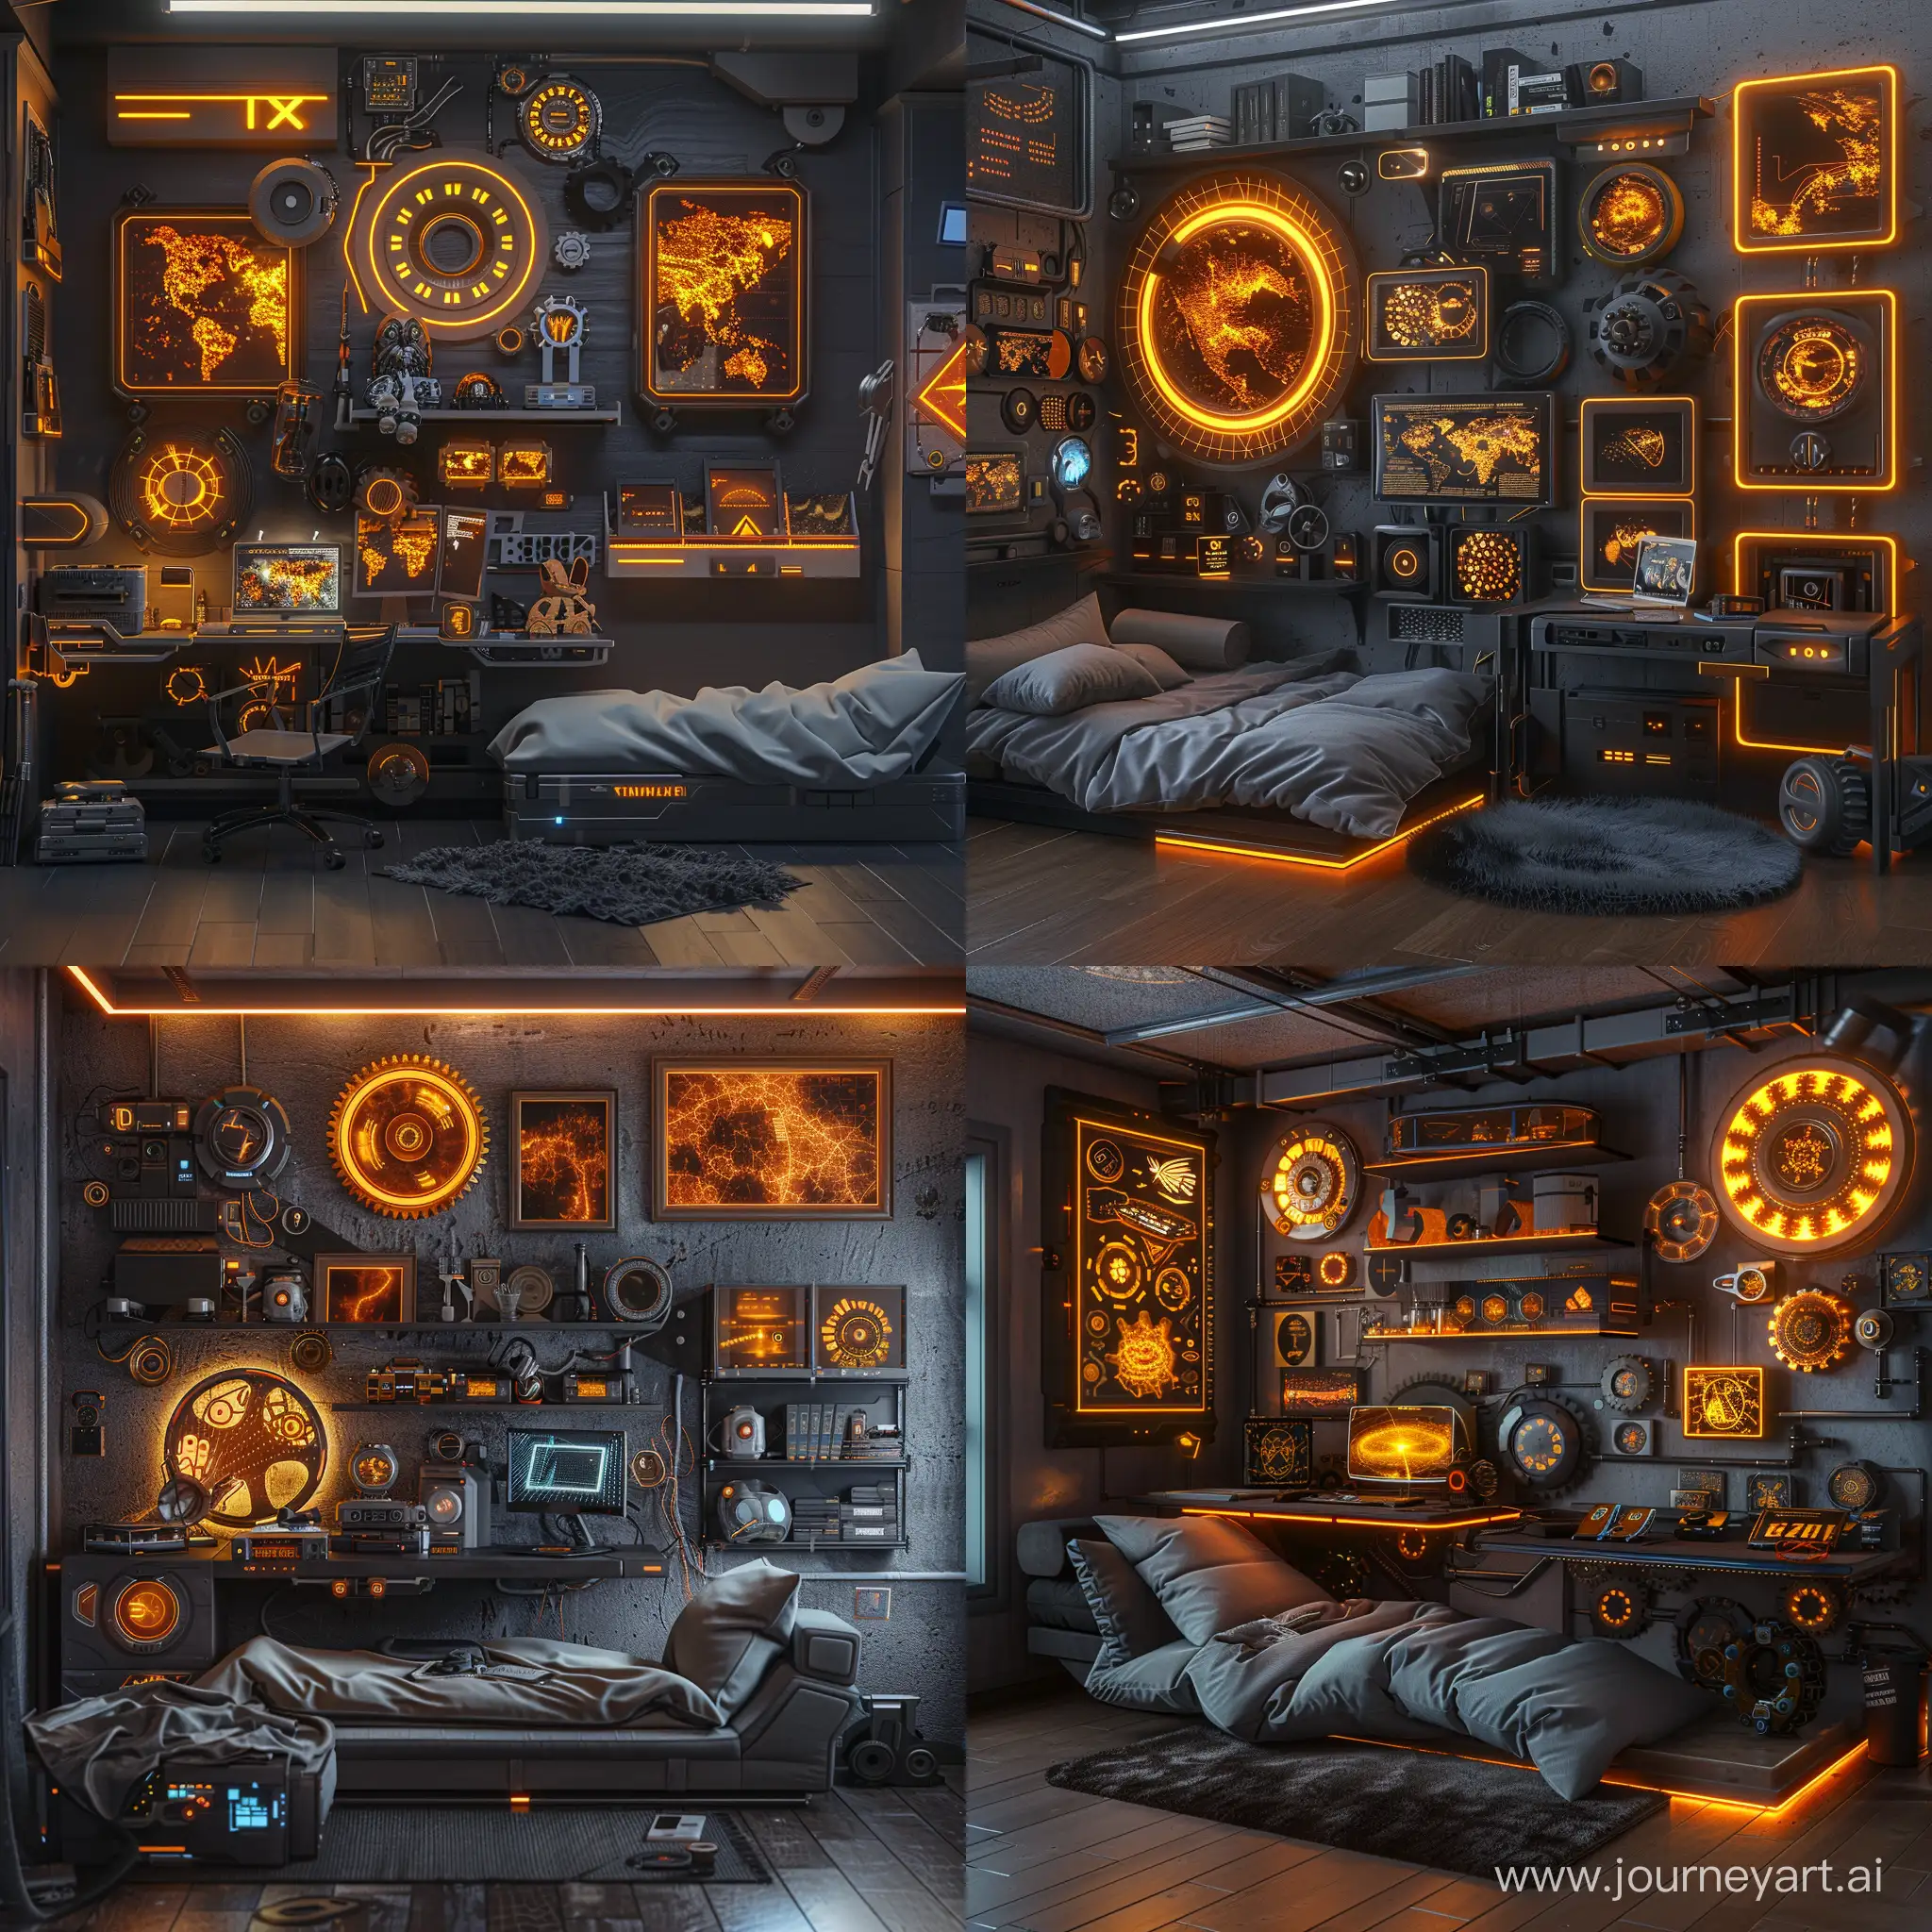 an organized futuristic sci-fi basement having a crazy desk setup, a sleeping couch, futuristic gears, a shelf of items, and futuristic image frames on the wall. nighttime setting, cyberpunk style but with the orange and gold glowing color theme 